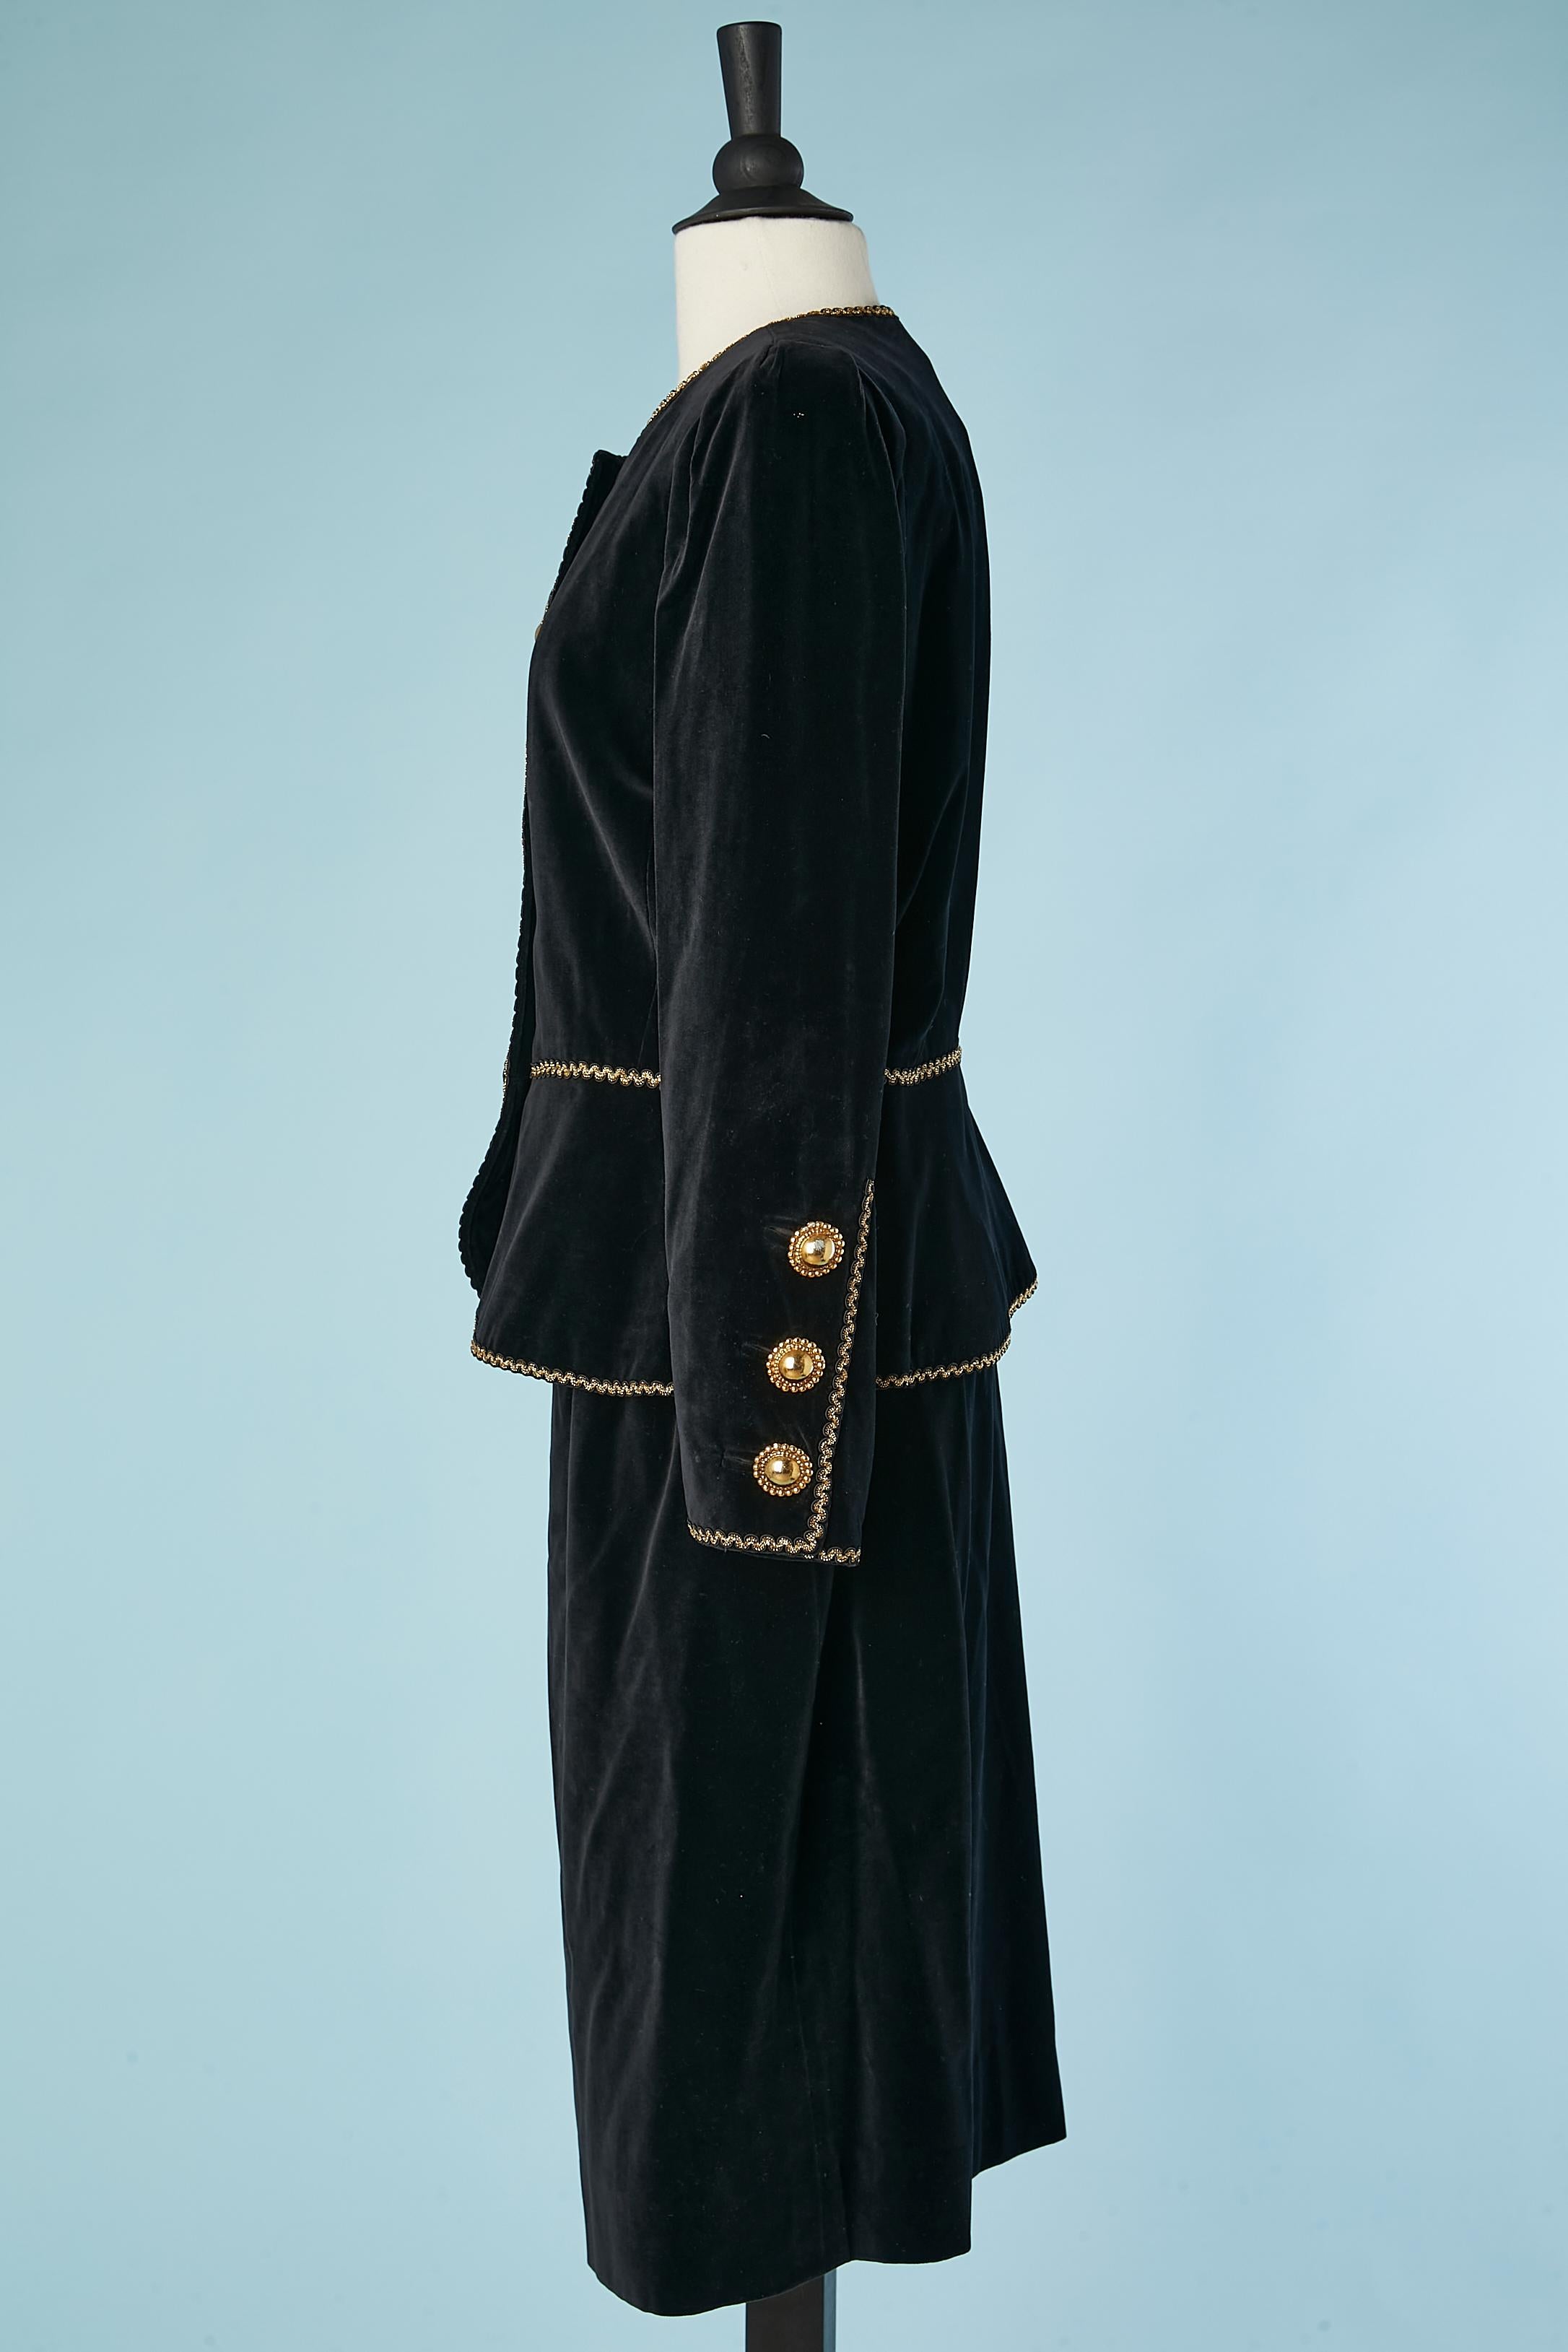 Women's Black velvet cocktail skirt suit with gold metal buttons YSL Rive gauche 1980's 